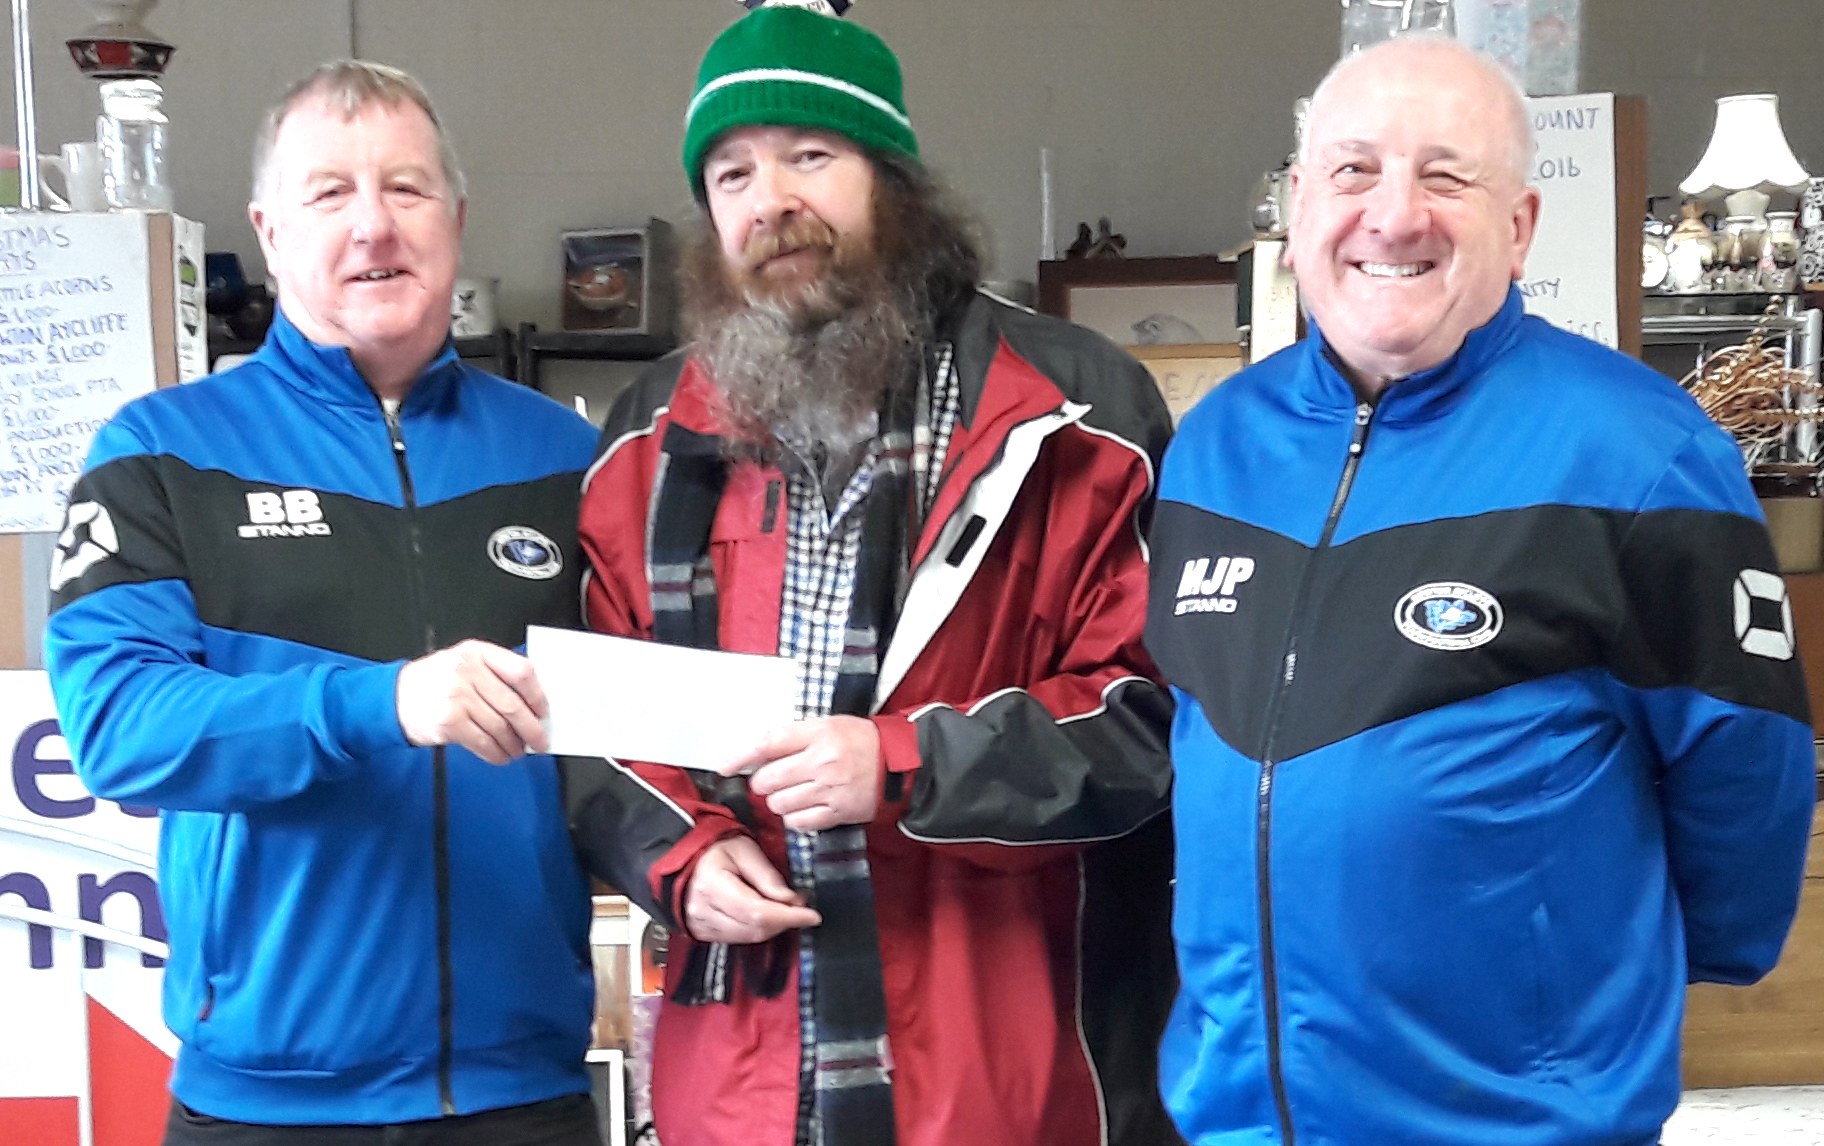 £1000 Donation for Youth Football Club